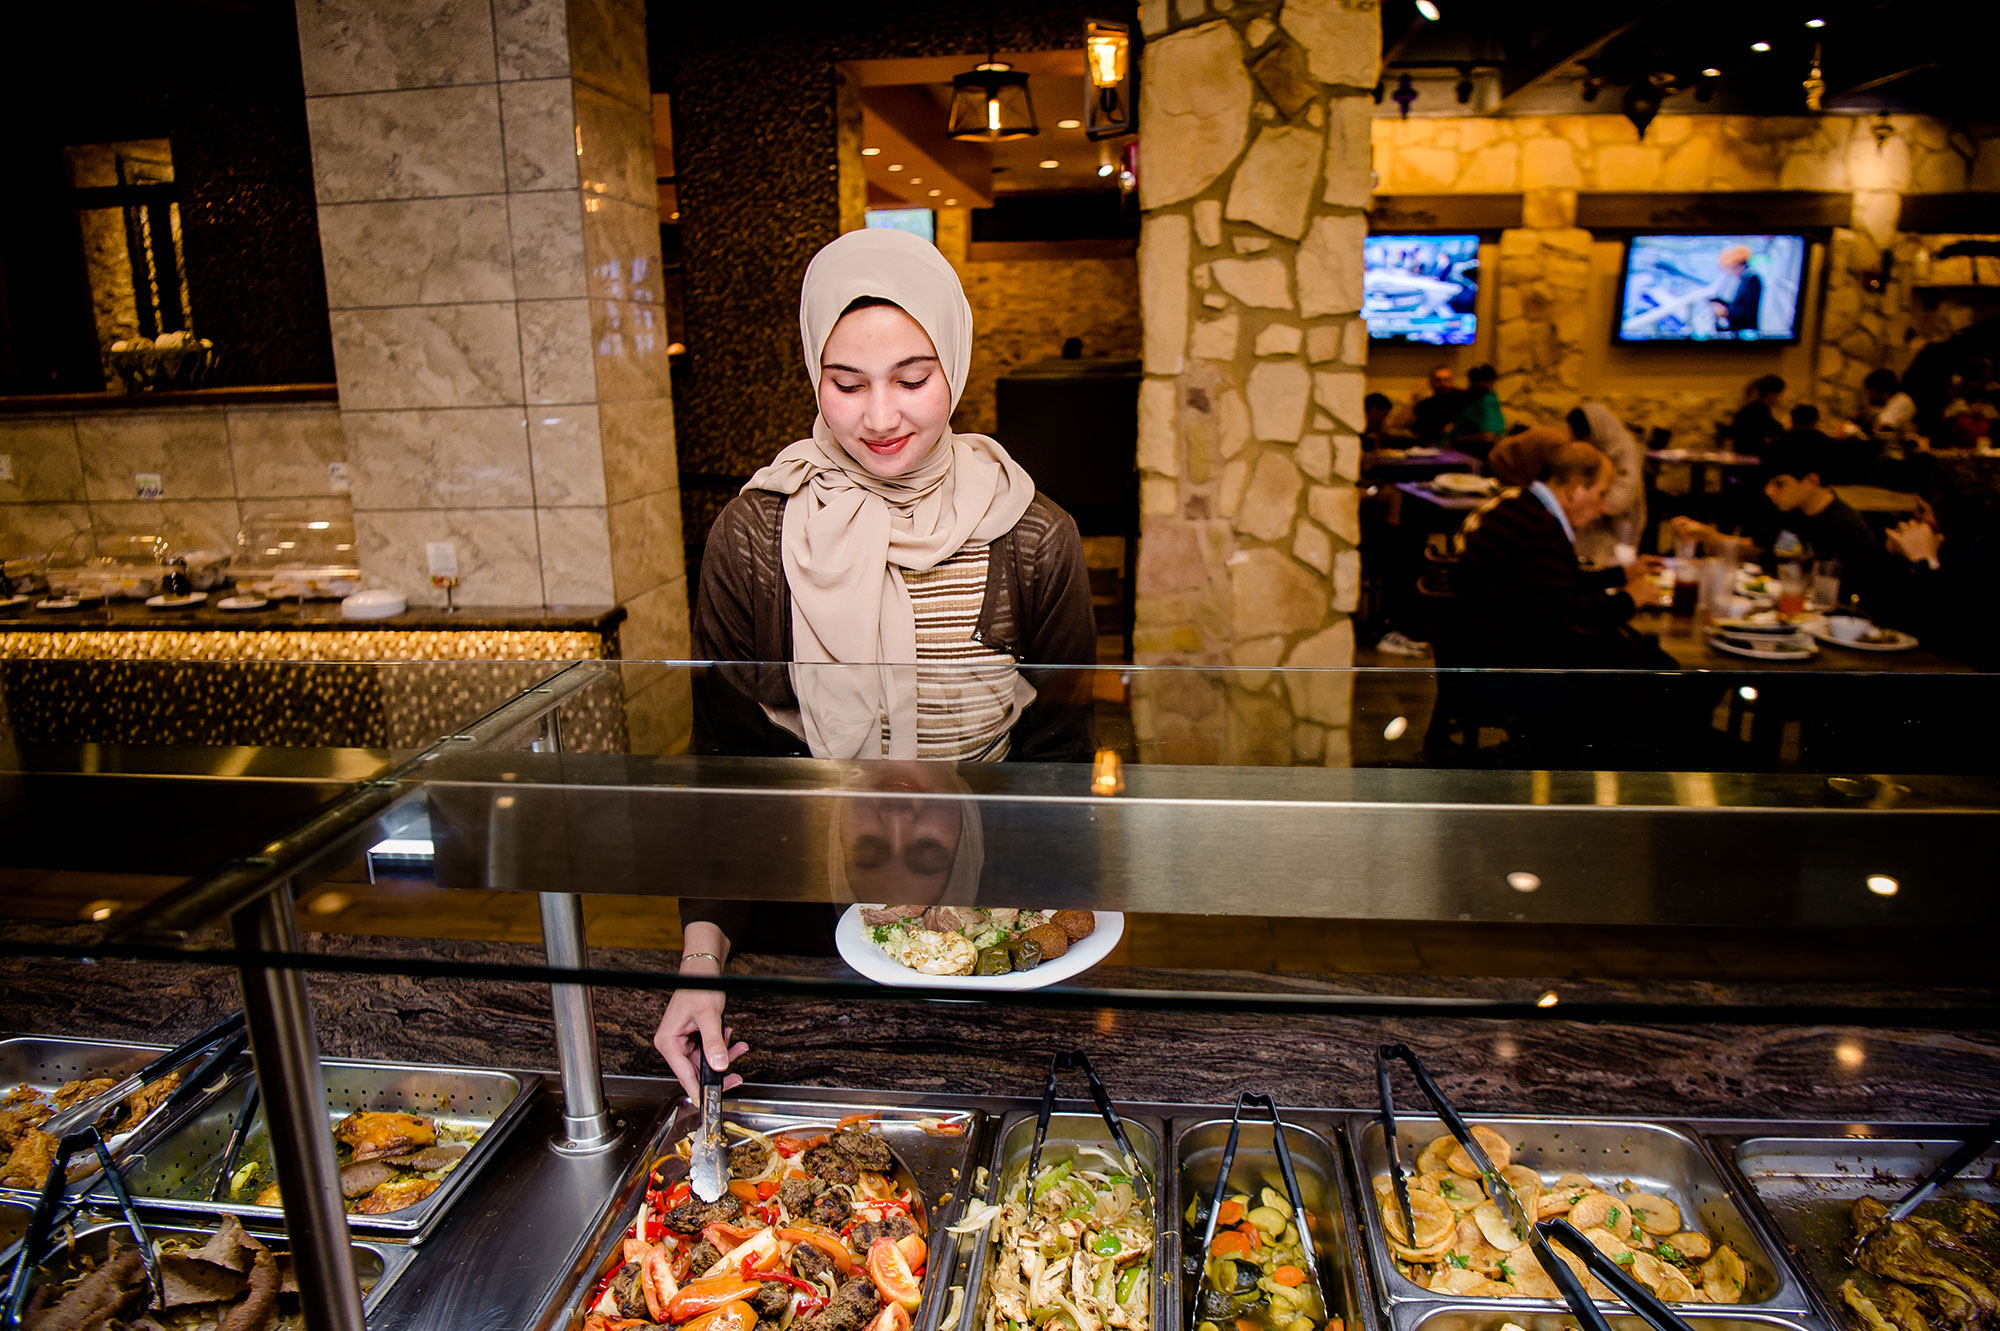 A woman dressed in a hijab serves a plate of food at a buffet